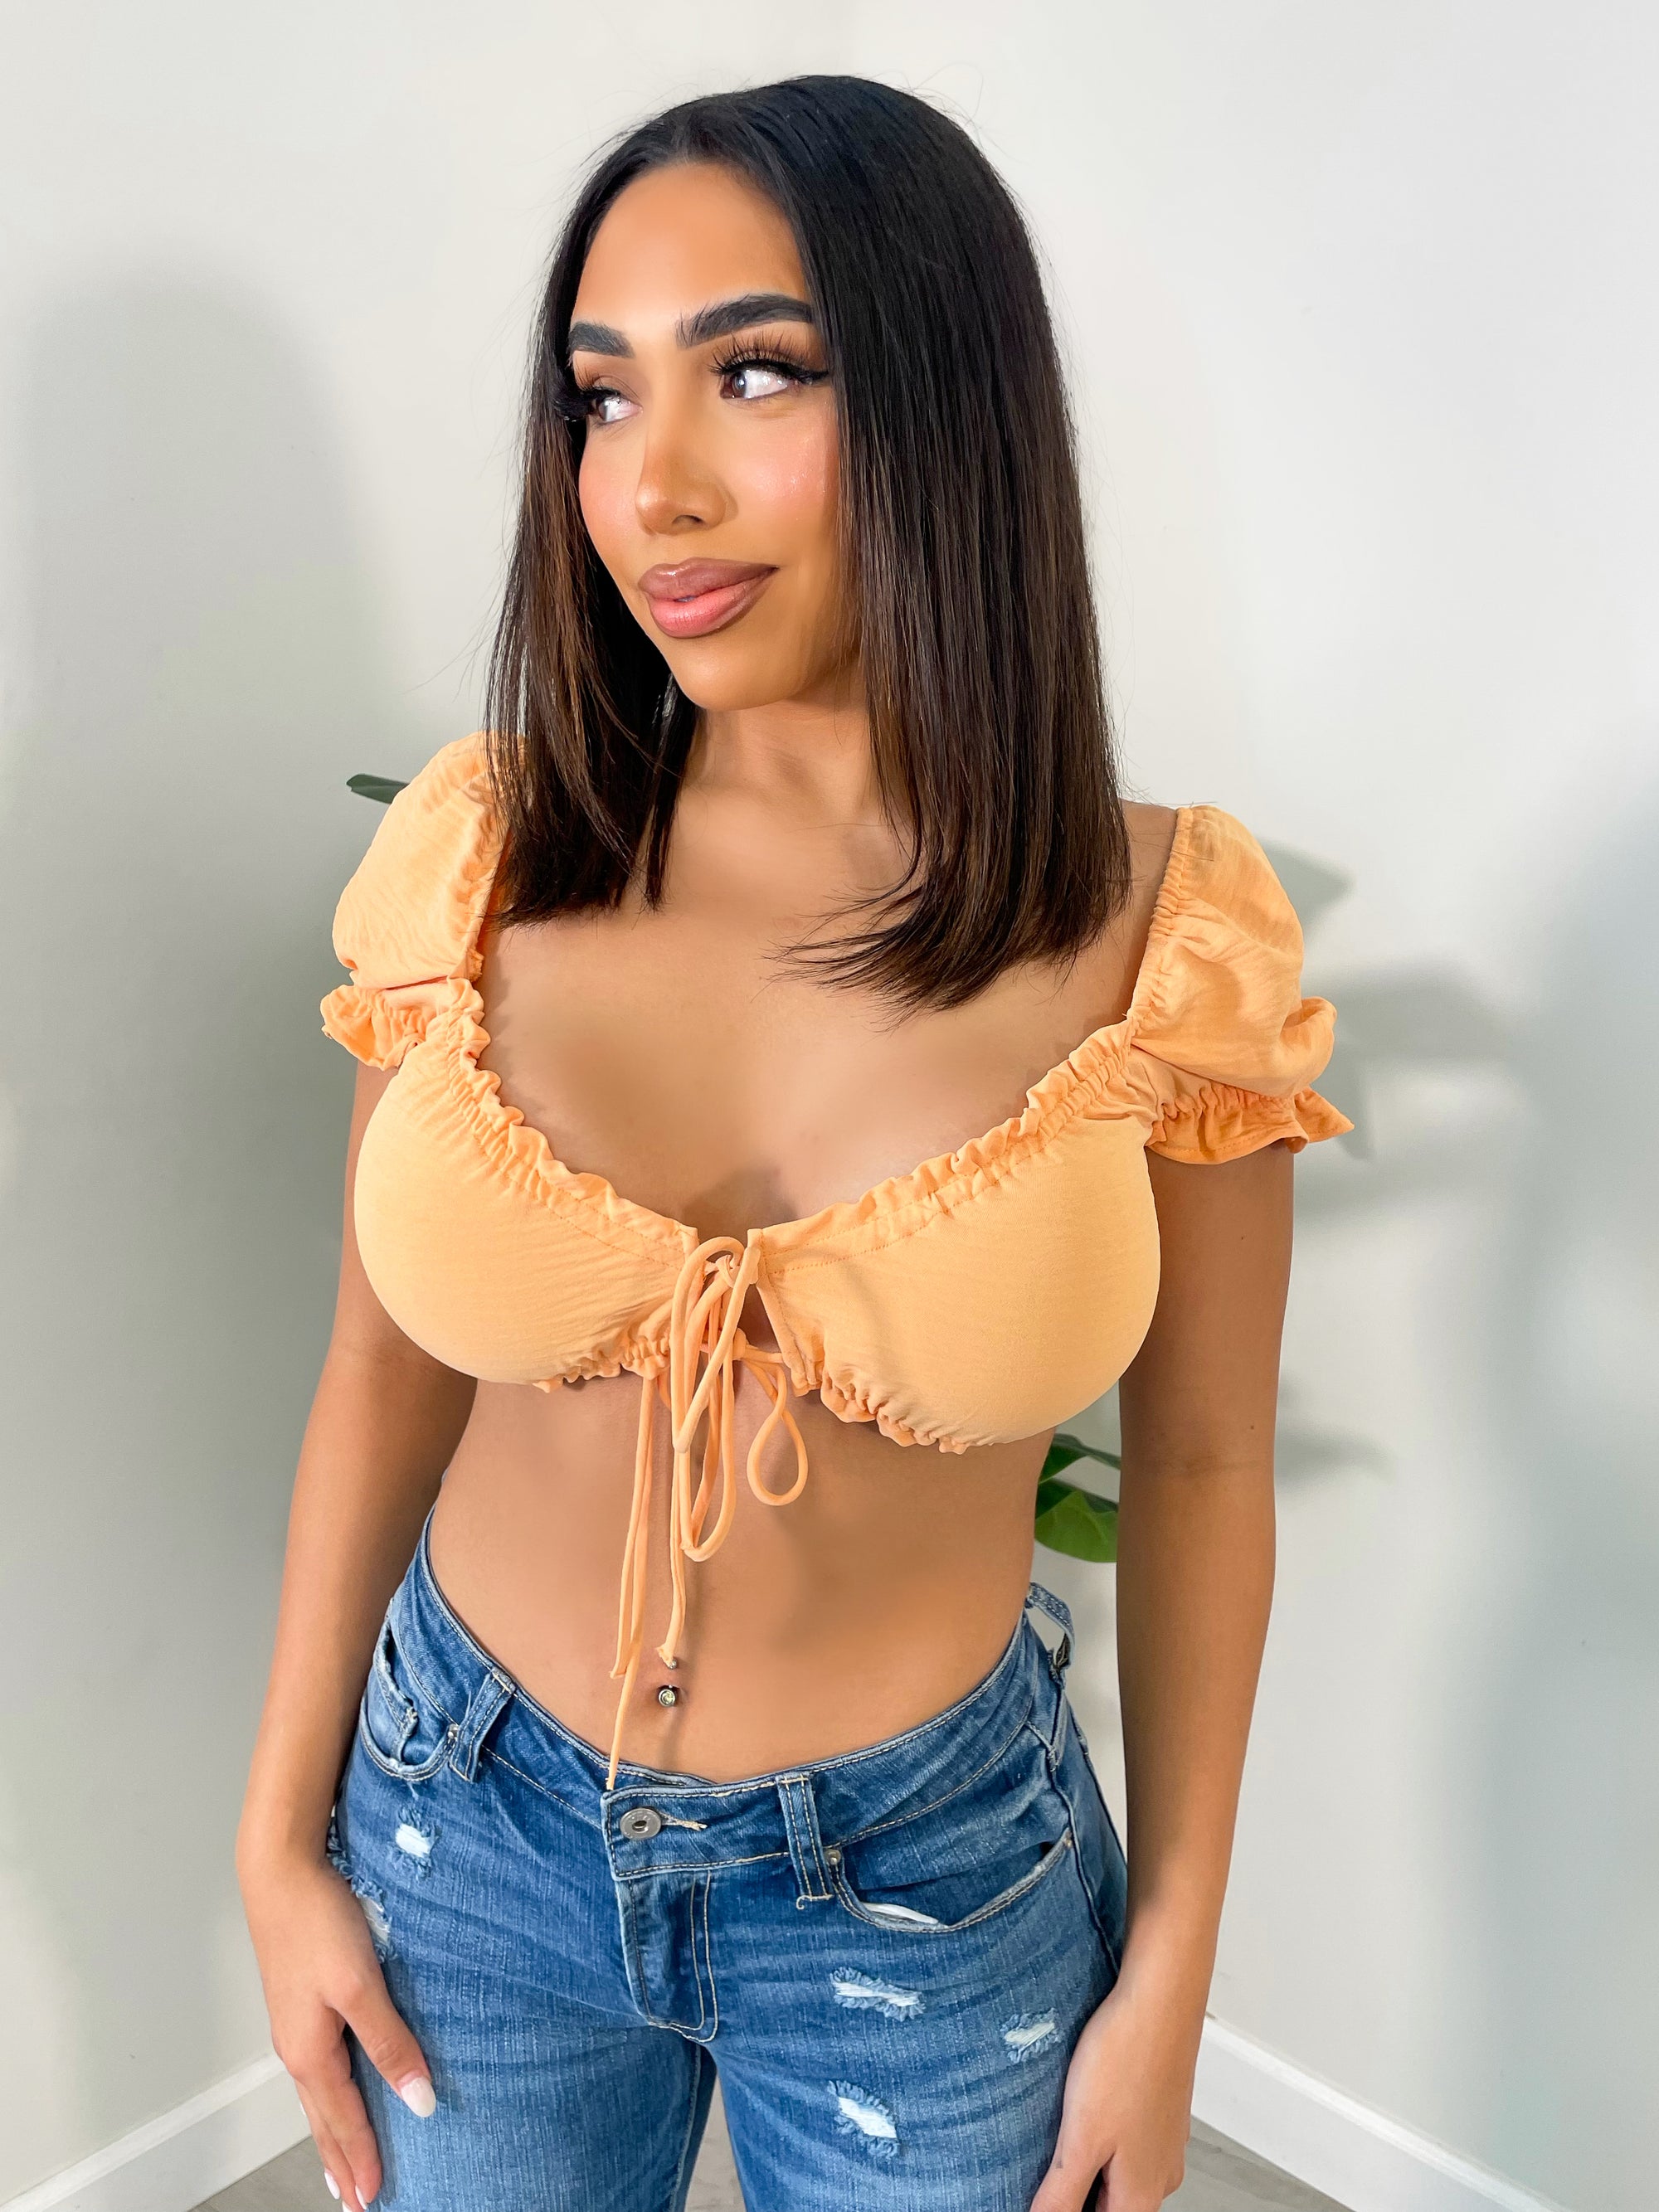 Andreia Boutique UK - friday feeling🥂 'elsie no bra club crop top' 🔥 tap  to shop // www.andreiaboutique.com #instagood #croptop #fashion #style  #autumnstyle #halloween